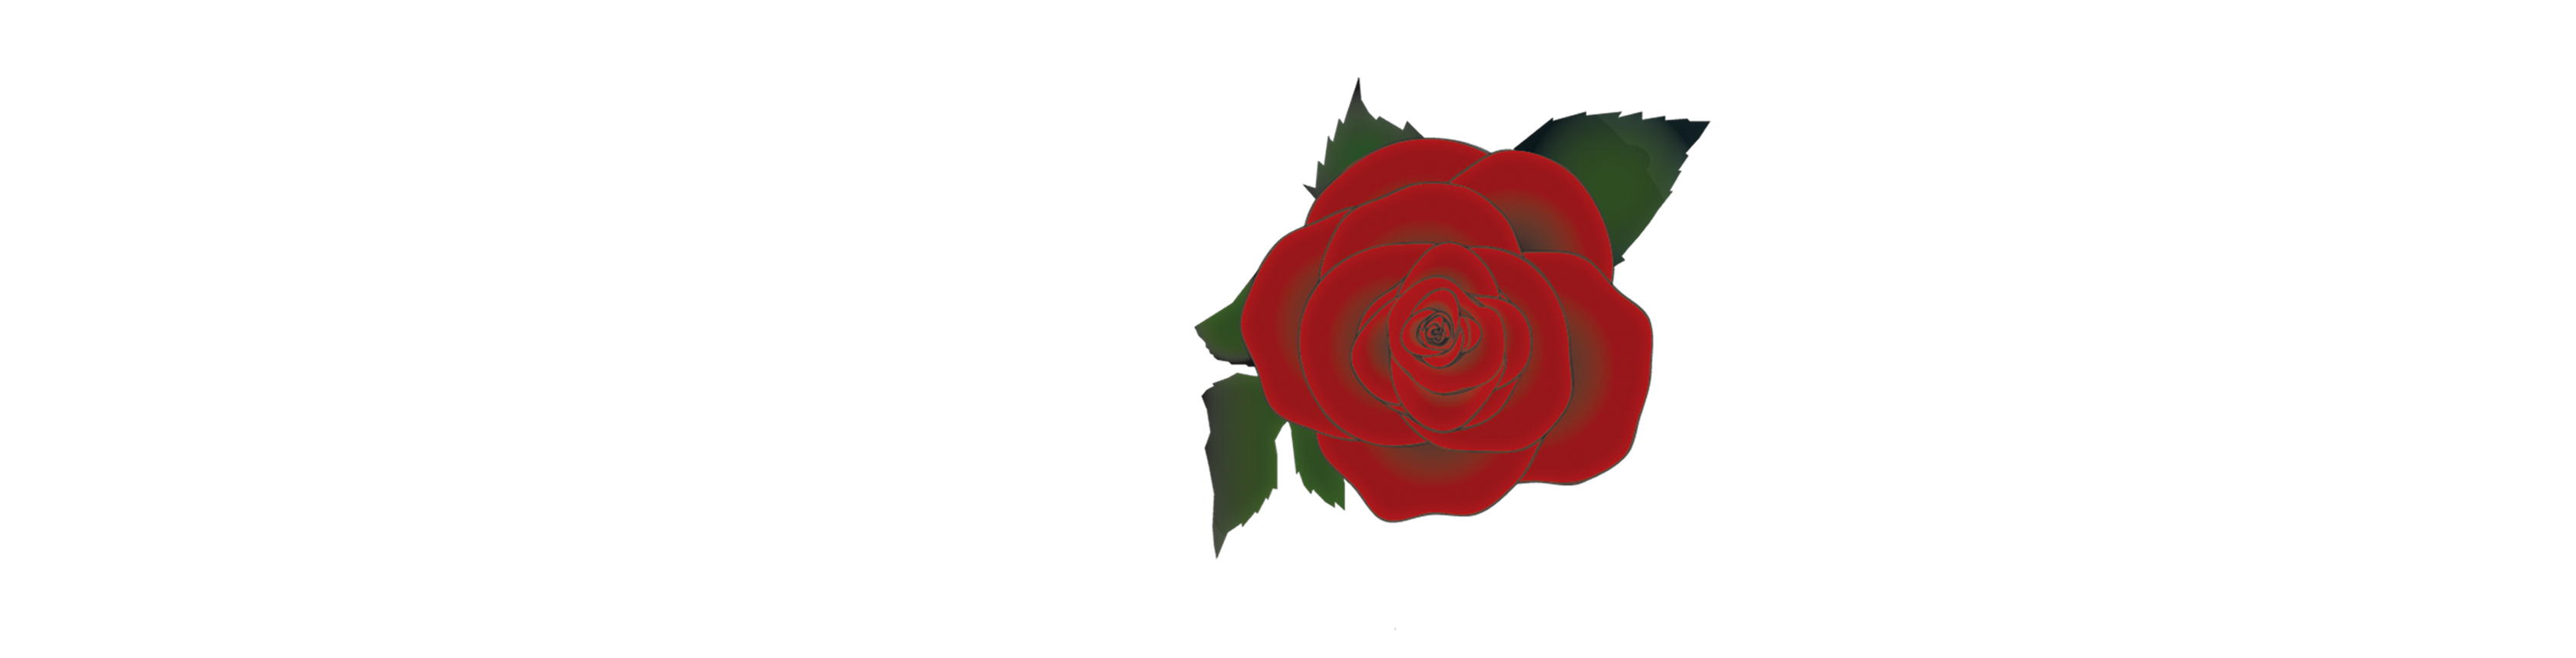 Logo of The House of Rose, the hallmark of bespoke clothing and dresses in Portland, OR.